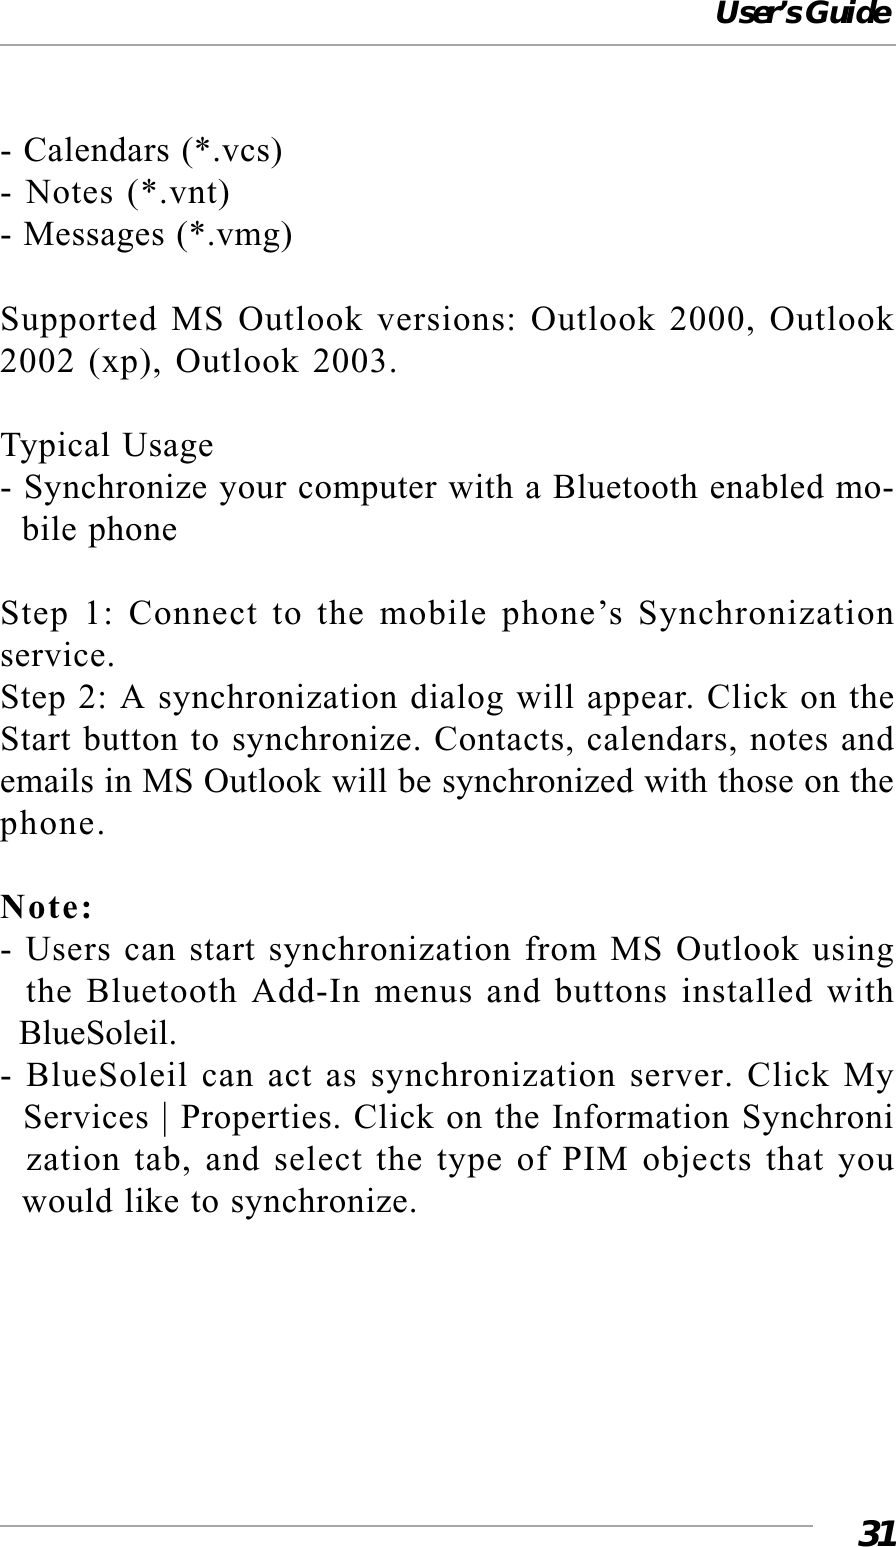 User’s Guide31- Calendars (*.vcs)- Notes (*.vnt)- Messages (*.vmg)Supported MS Outlook versions: Outlook 2000, Outlook2002 (xp), Outlook 2003.Typical Usage- Synchronize your computer with a Bluetooth enabled mo-  bile phoneStep 1: Connect to the mobile phone’s Synchronizationservice.Step 2: A synchronization dialog will appear. Click on theStart button to synchronize. Contacts, calendars, notes andemails in MS Outlook will be synchronized with those on thephone.Note:- Users can start synchronization from MS Outlook using  the Bluetooth Add-In menus and buttons installed with  BlueSoleil.- BlueSoleil can act as synchronization server. Click My  Services | Properties. Click on the Information Synchroni  zation tab, and select the type of PIM objects that you  would like to synchronize.